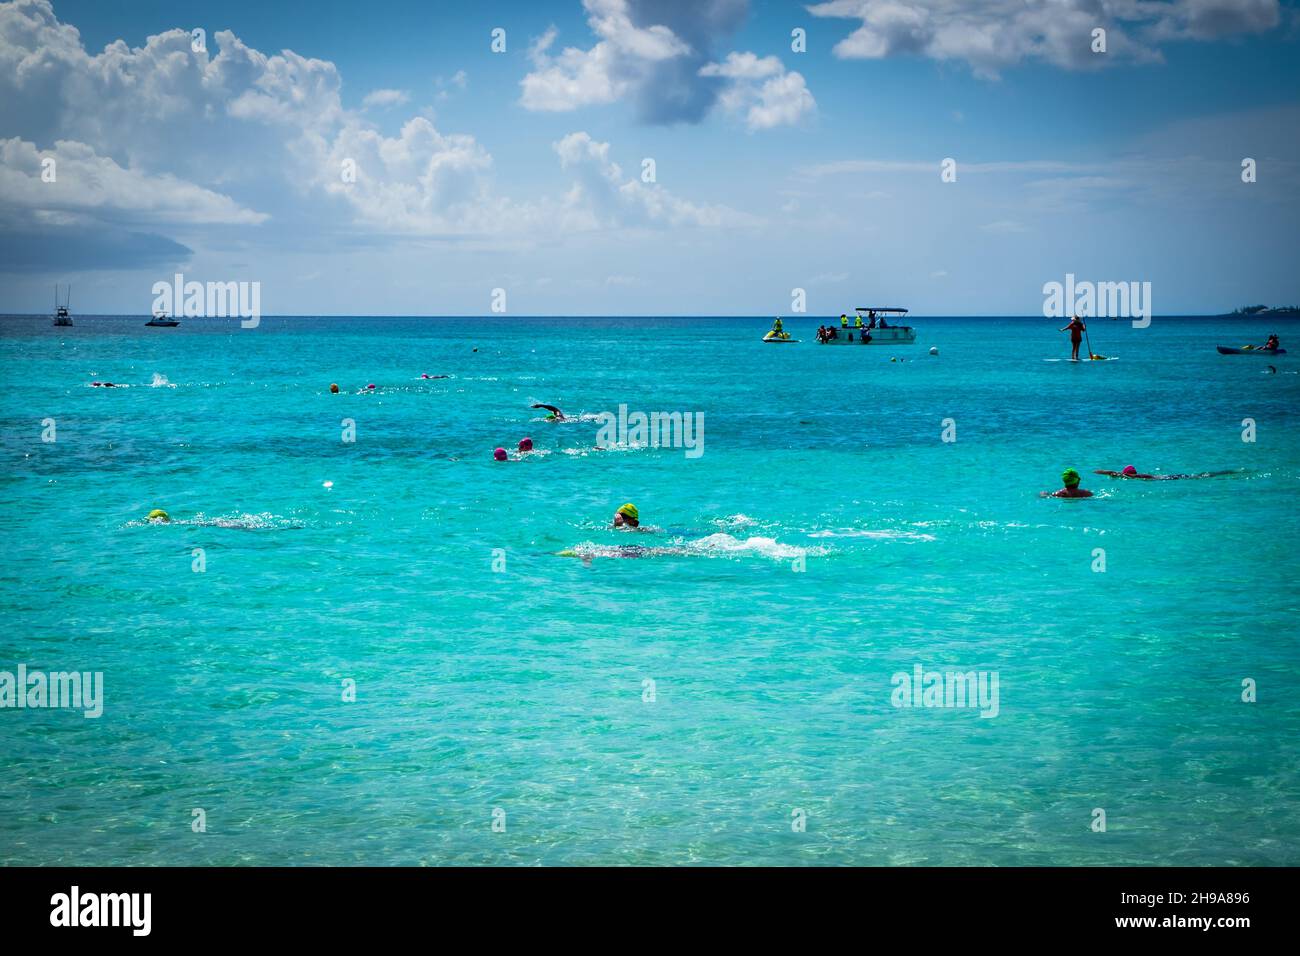 Swimmers in the Caribbean Sea during a competition by Seven Mile Beach, Grand Cayman, Cayman Islands Stock Photo